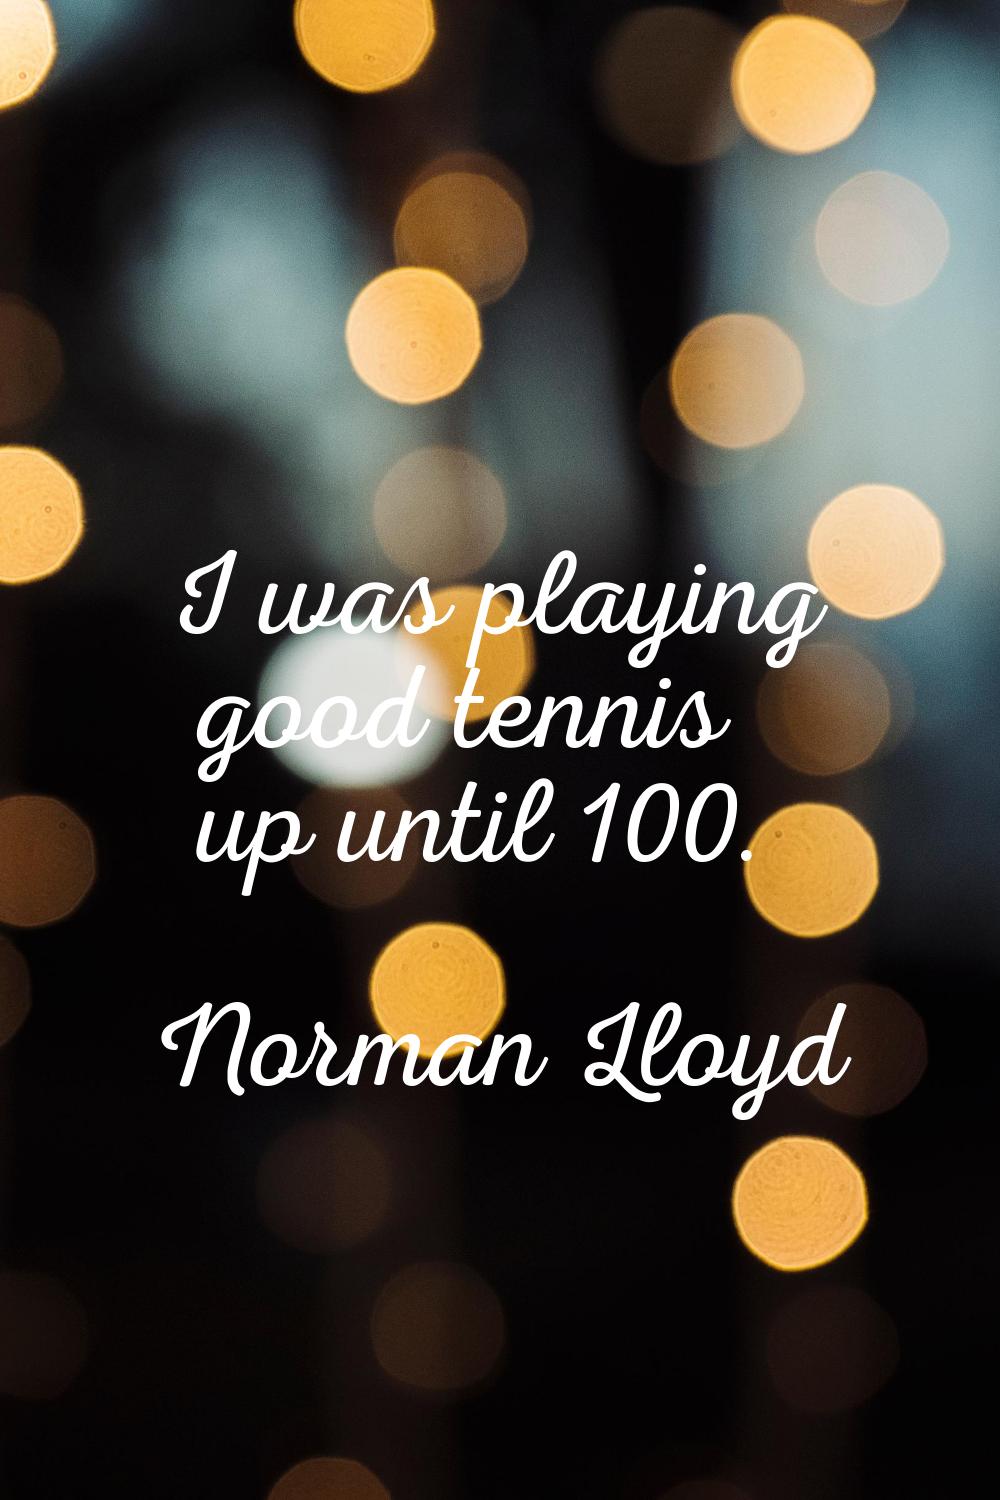 I was playing good tennis up until 100.